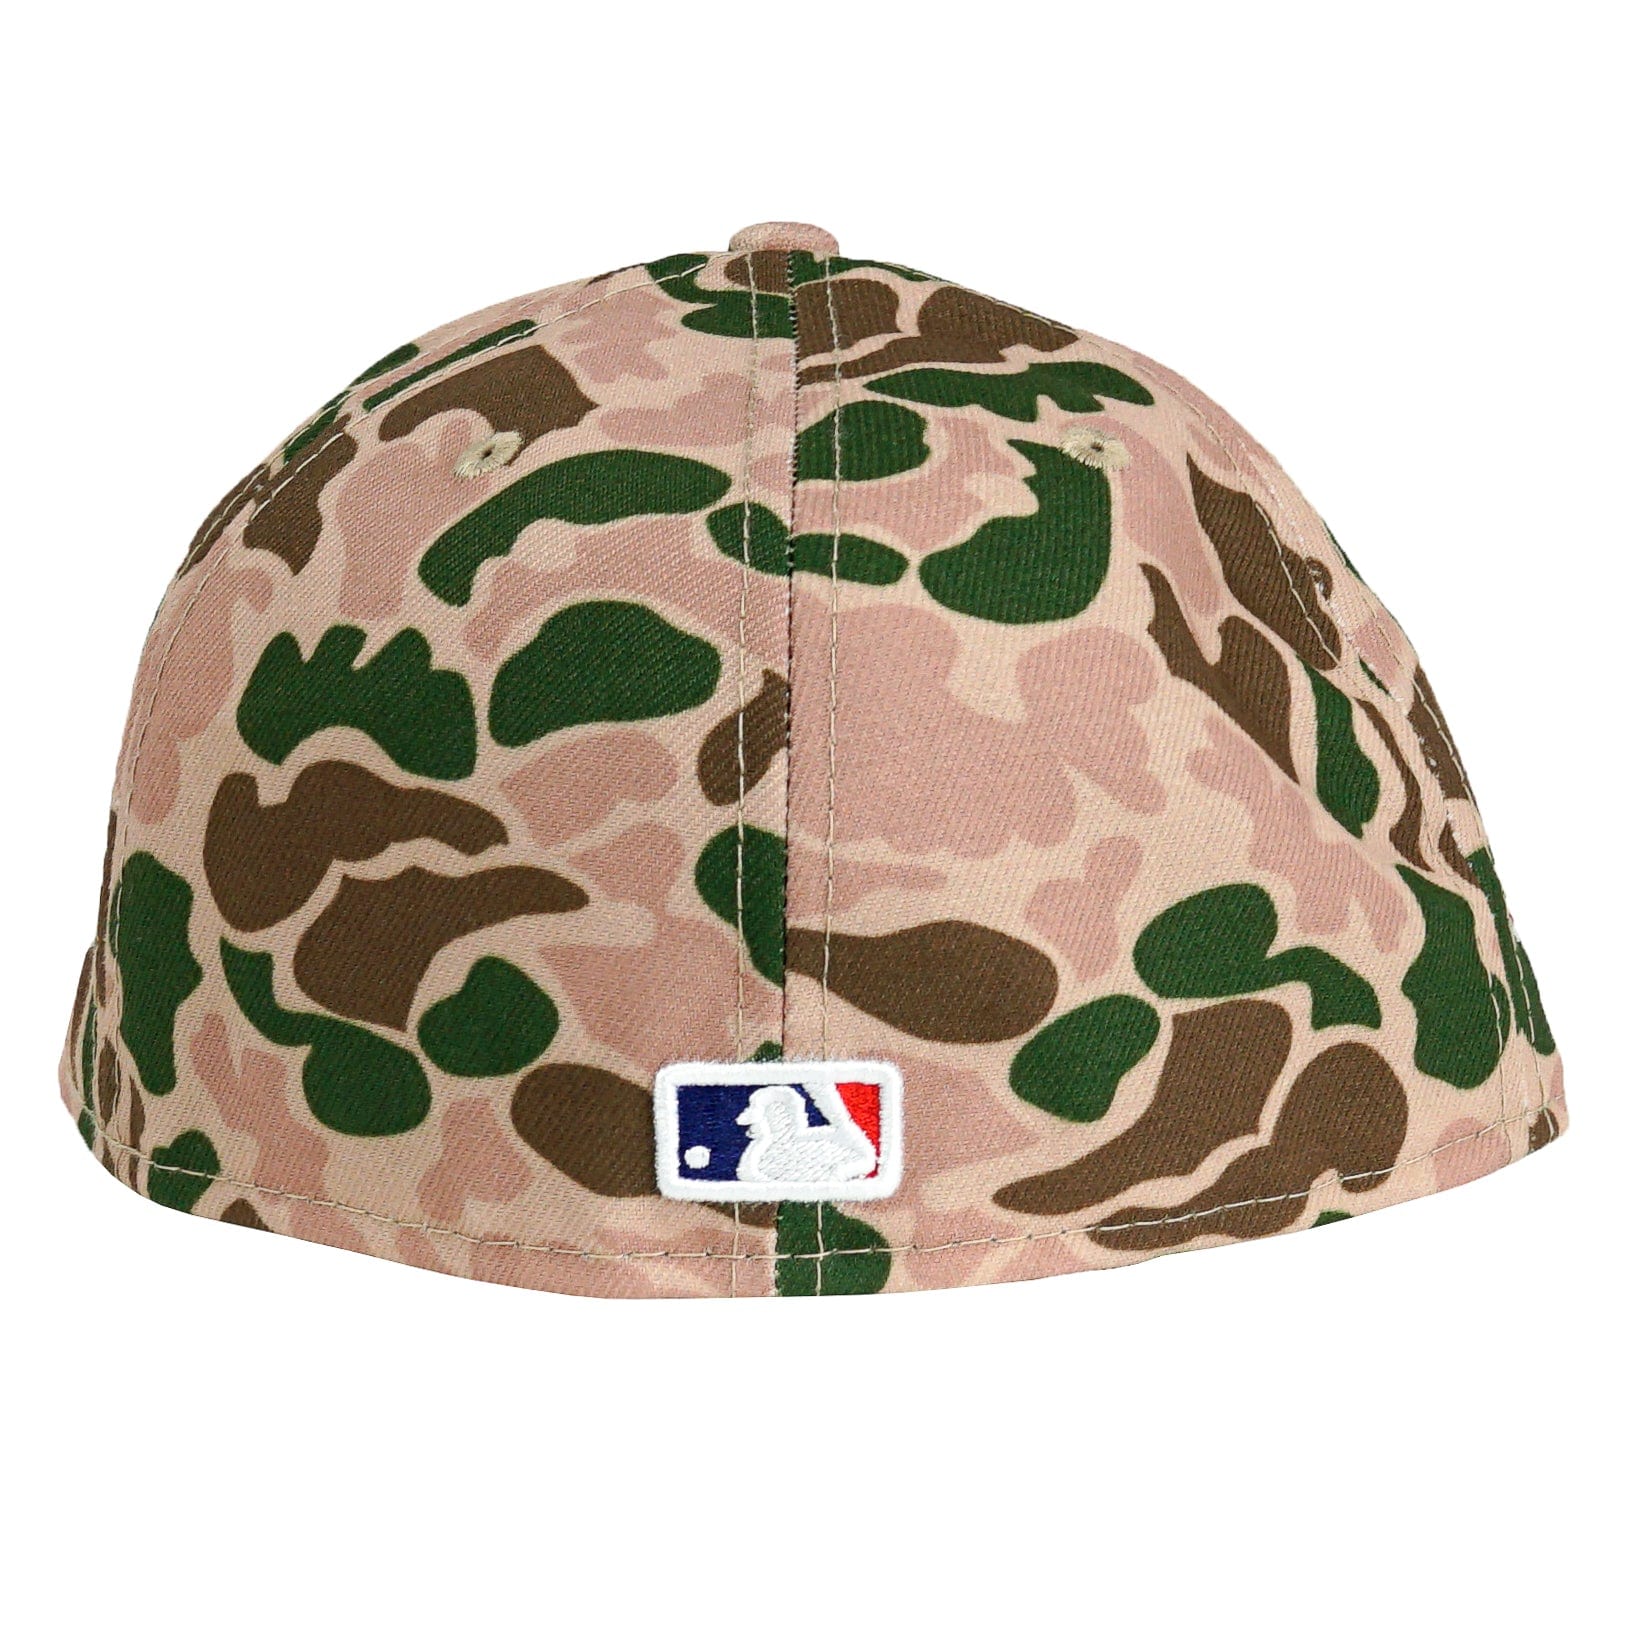 Oakland Athletics 59Fifty Fitted Hat in duck camo - New Era - State Of Flux